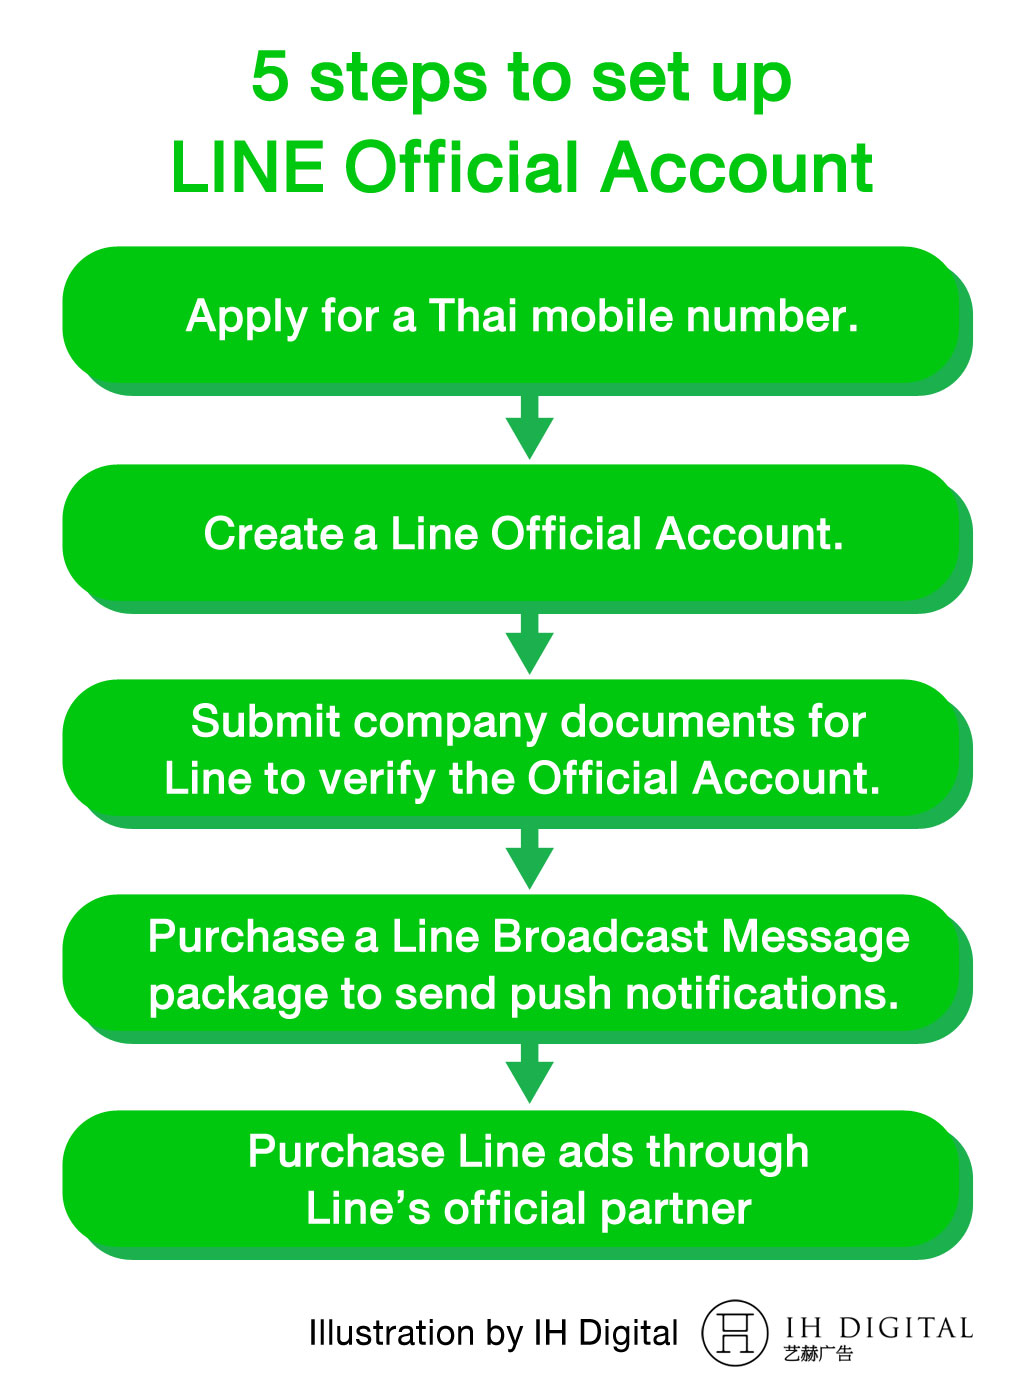 5-steps-to-set-up-LINE-OA-Guide to Line Marketing in Thailand 2020